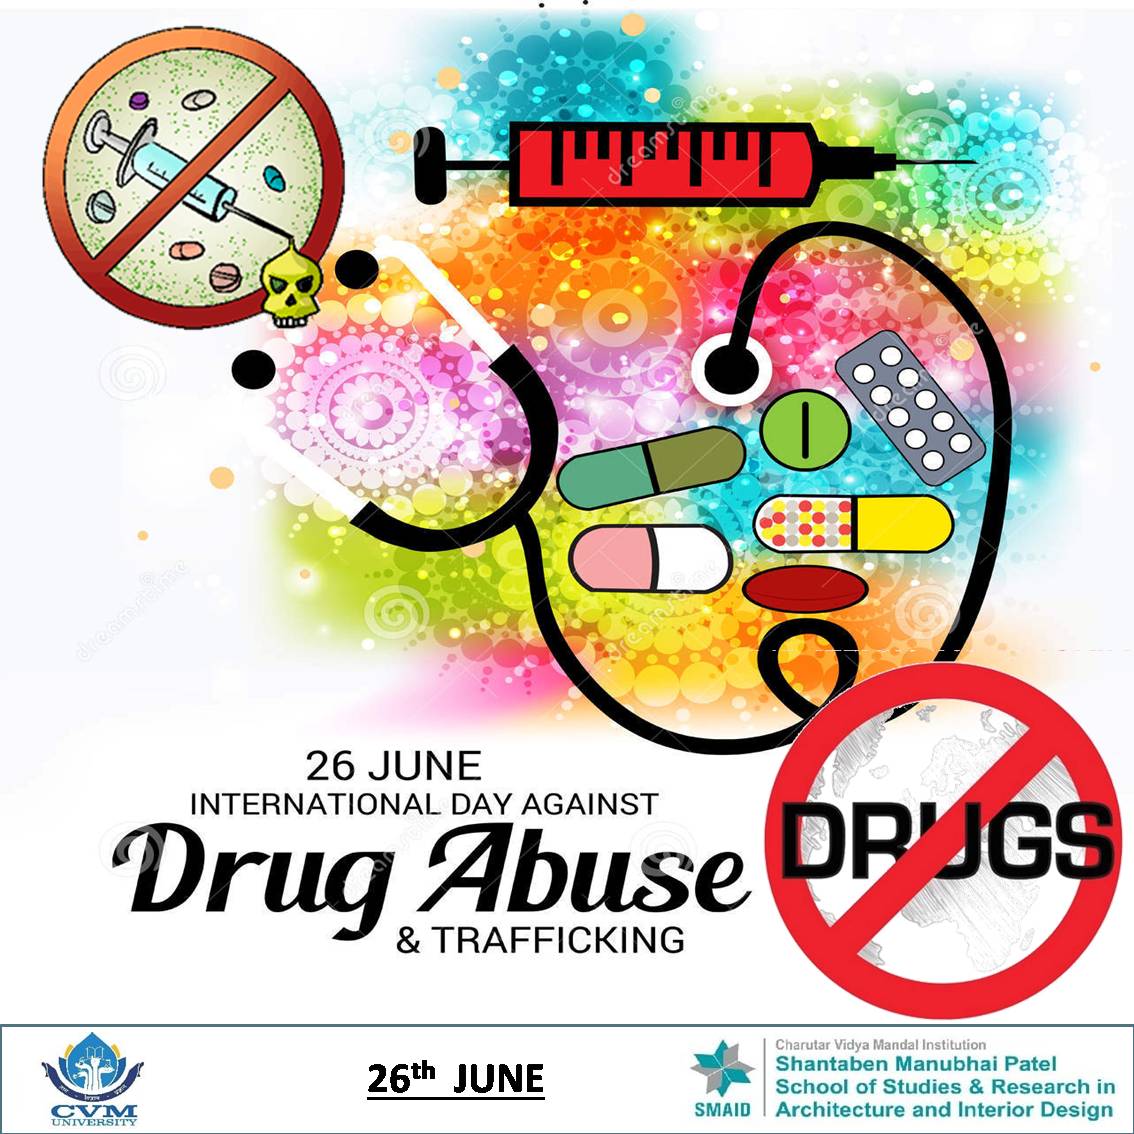 26th June Int. Day Against Drug Abuse & traficking